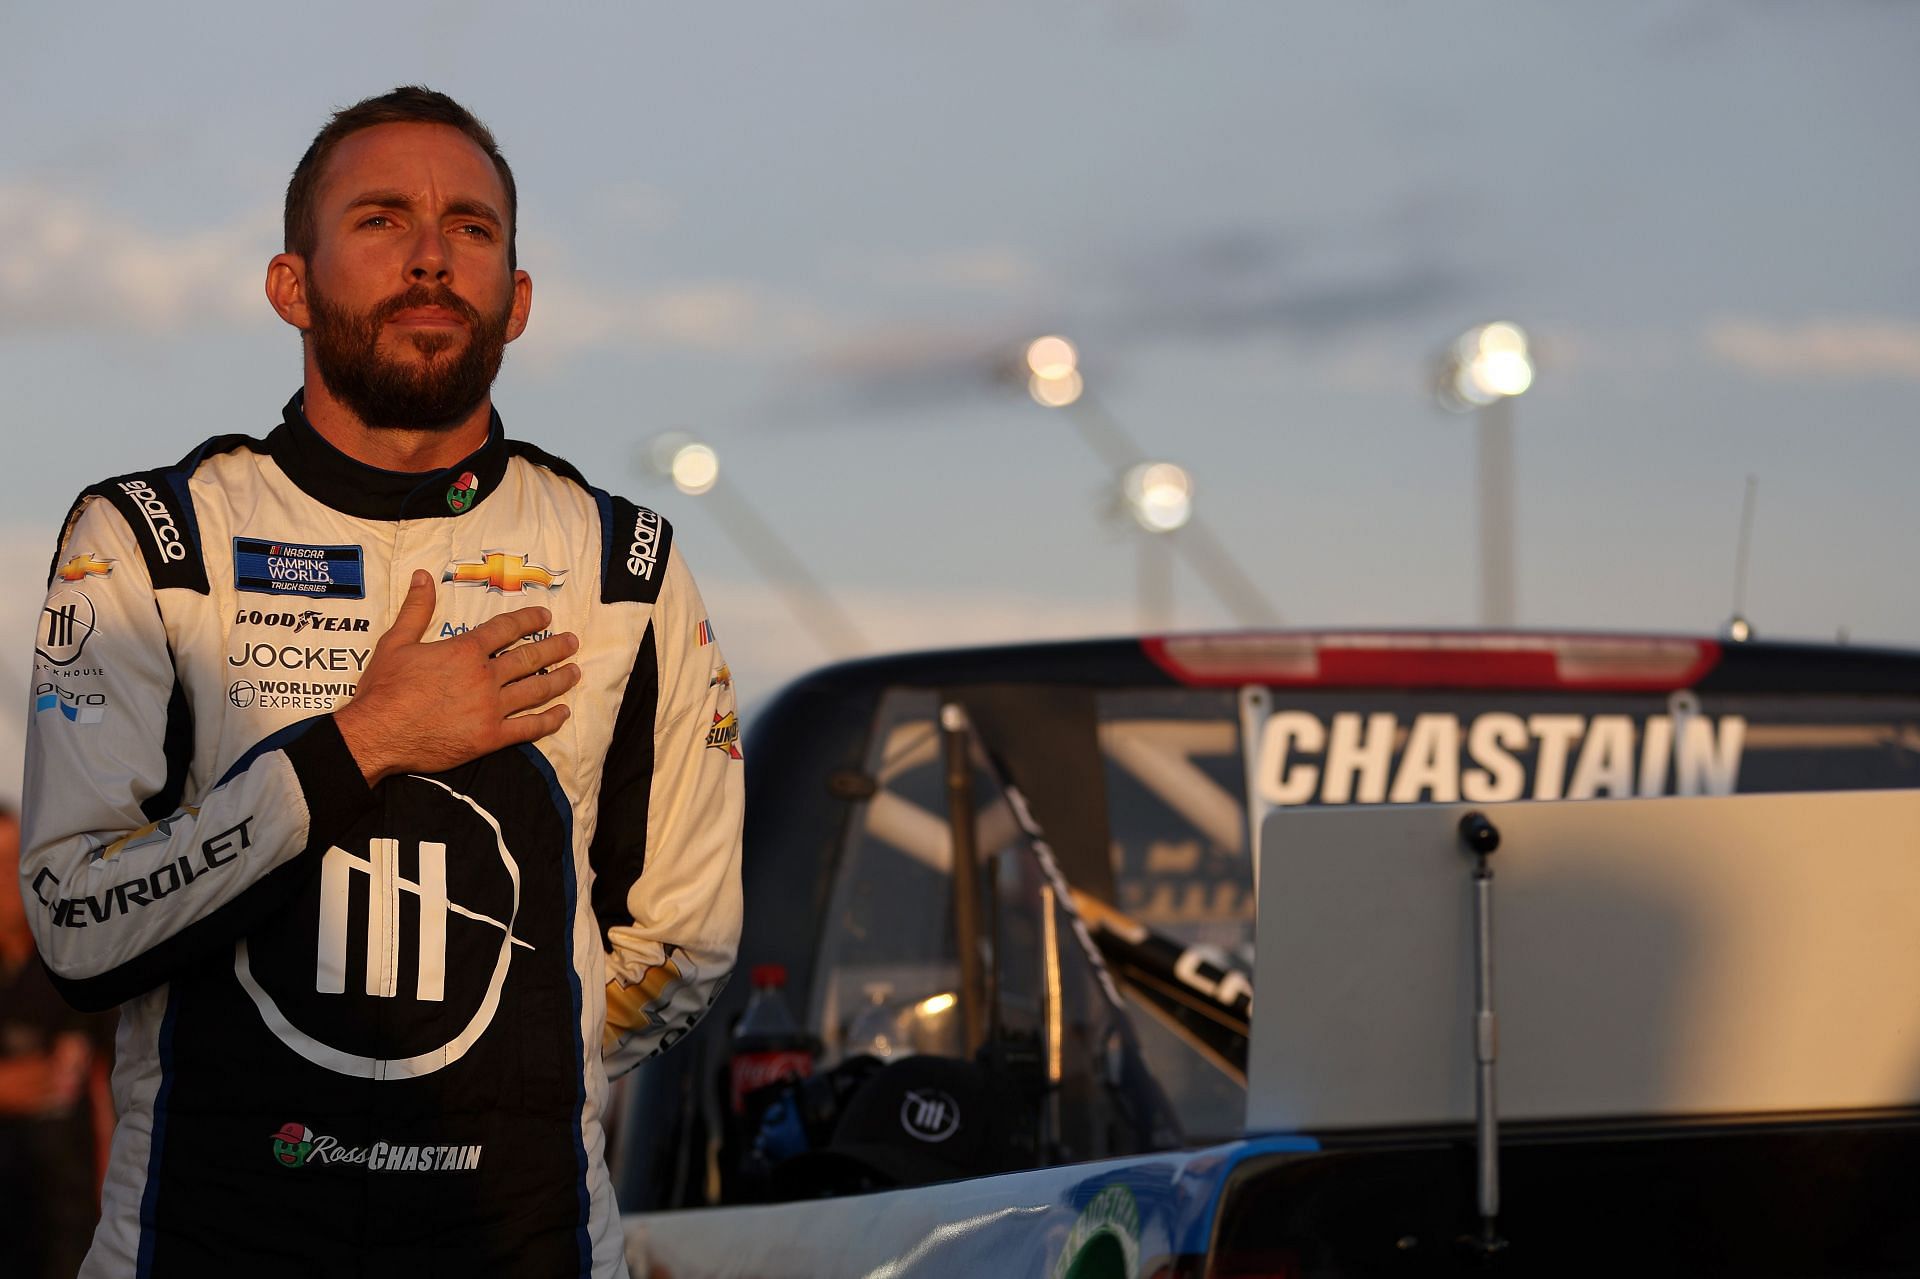 Ross Chastain stands on the grid during the national anthem prior to the NASCAR Camping World Truck Series Dead on Tools 200 at Darlington Raceway